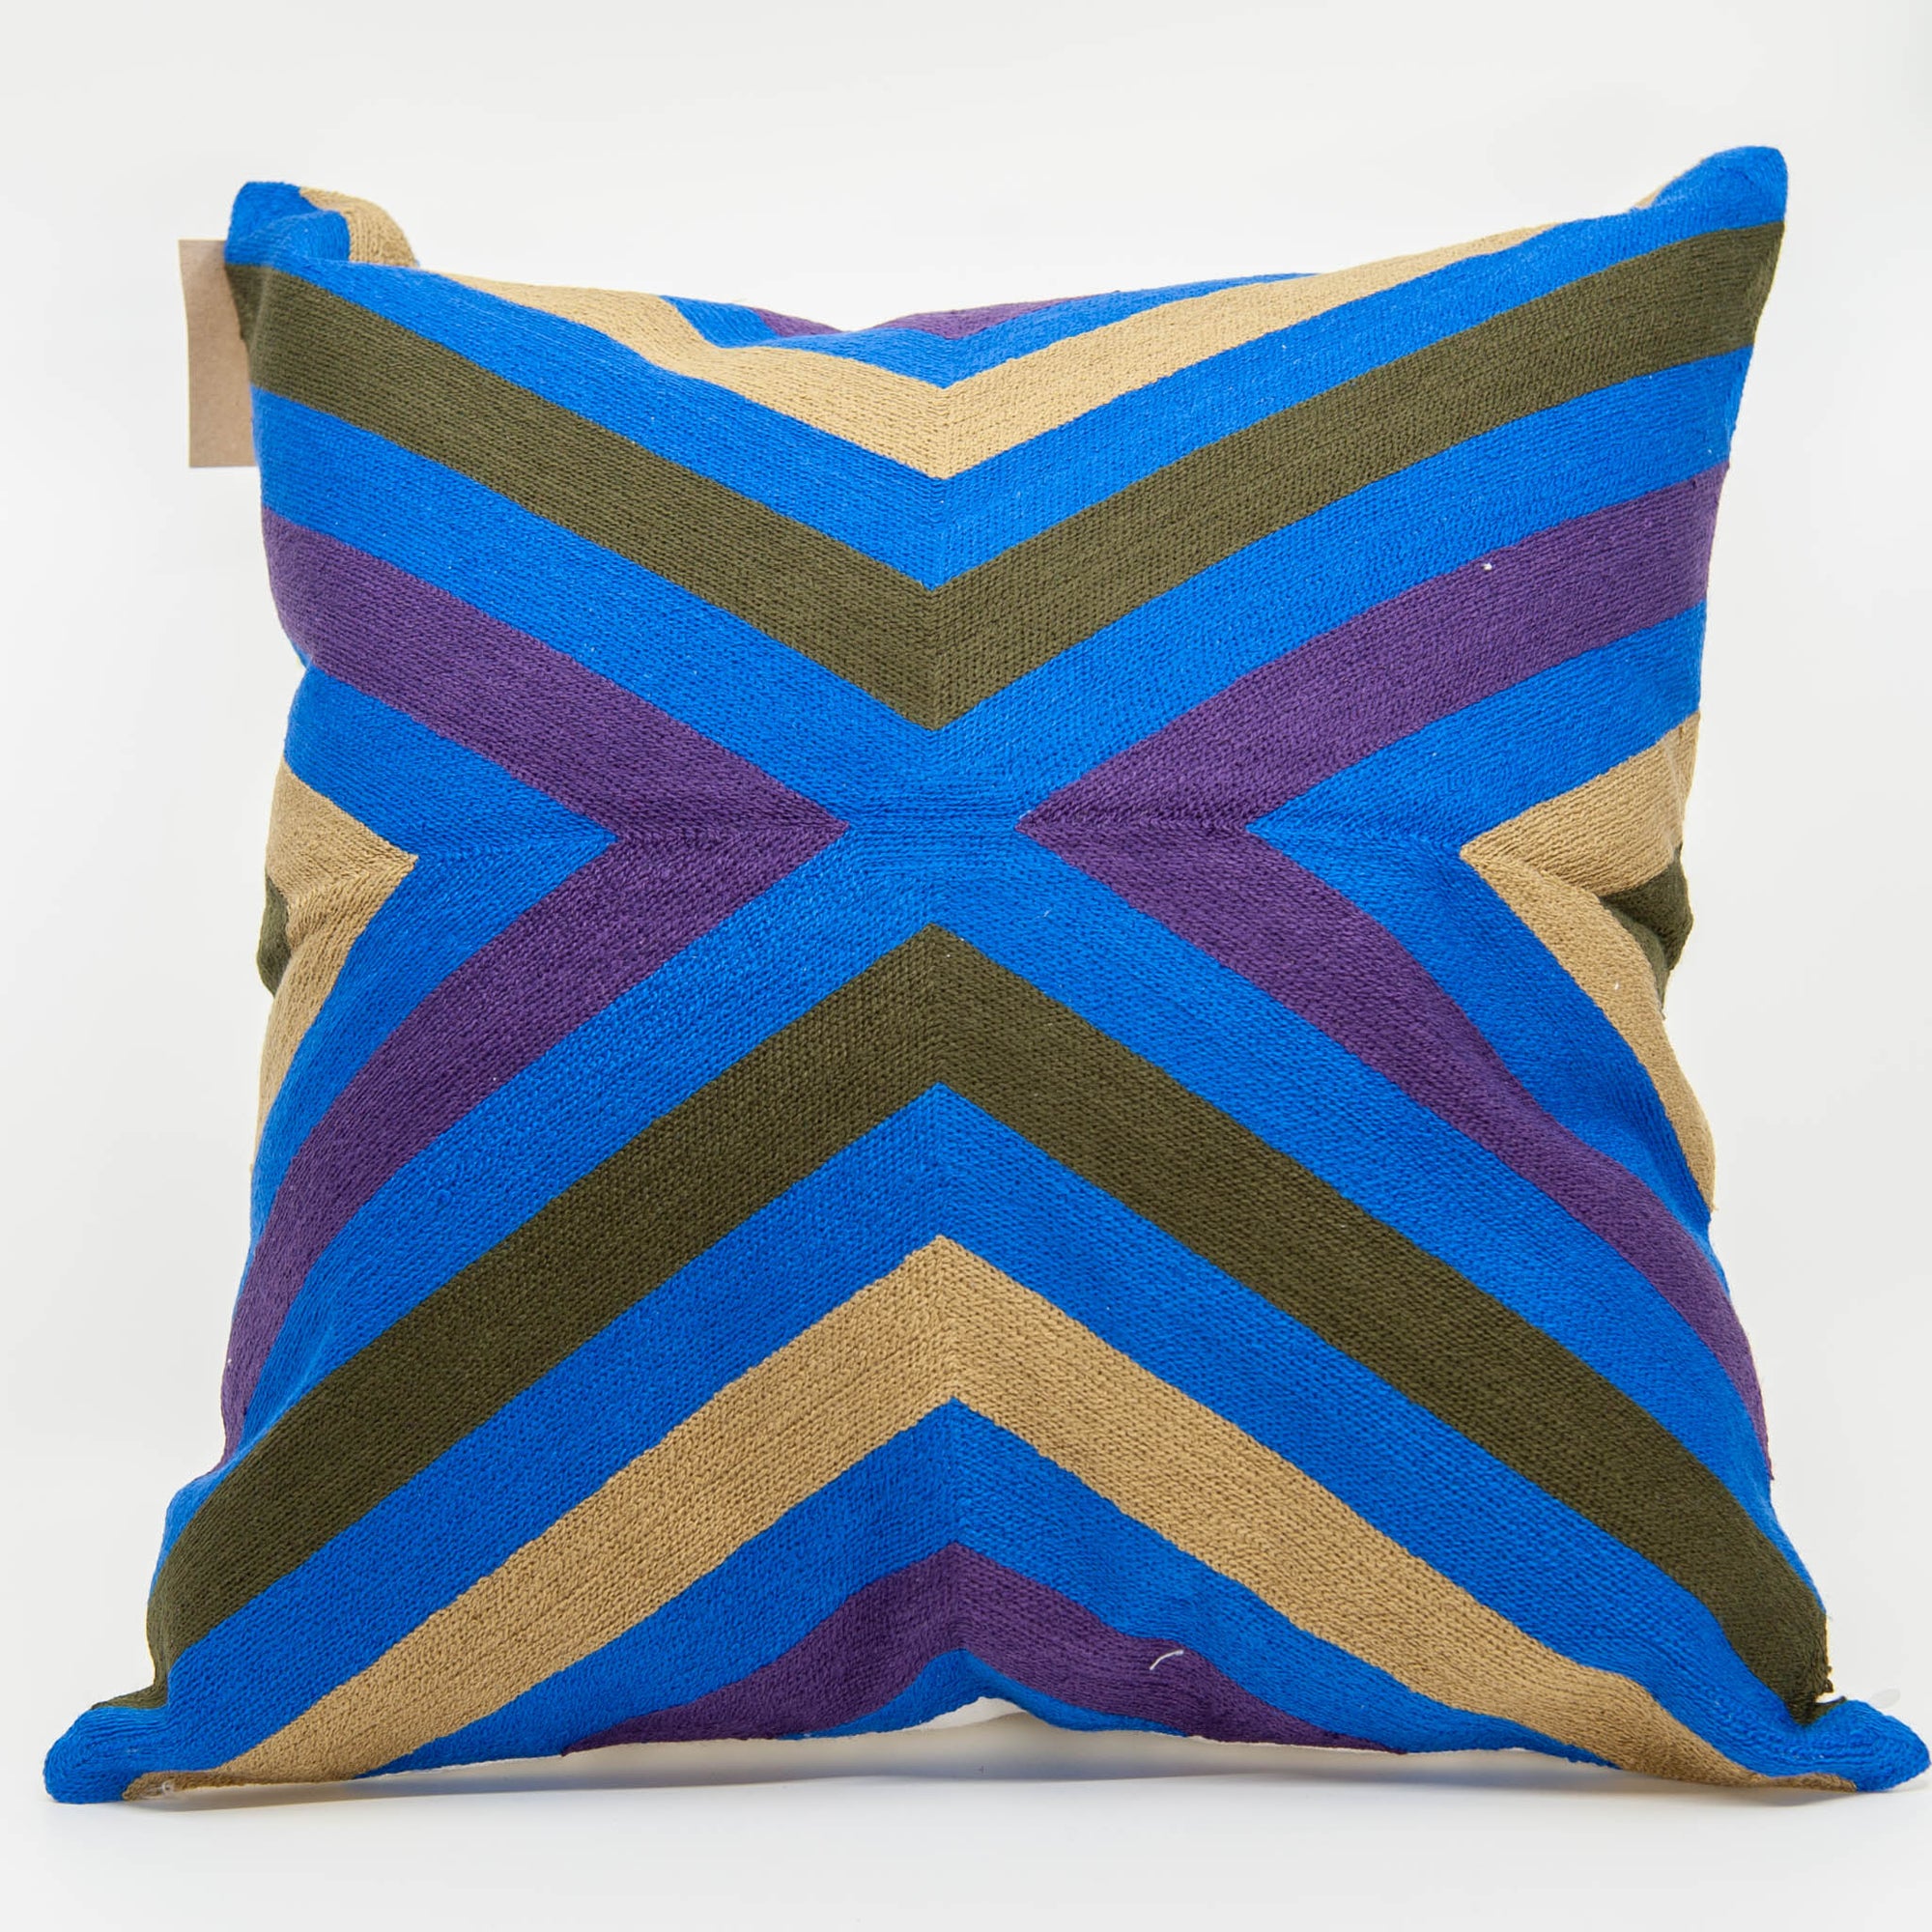 Embroidered Pillow Cover - Blue/Brown/Purple Chevron